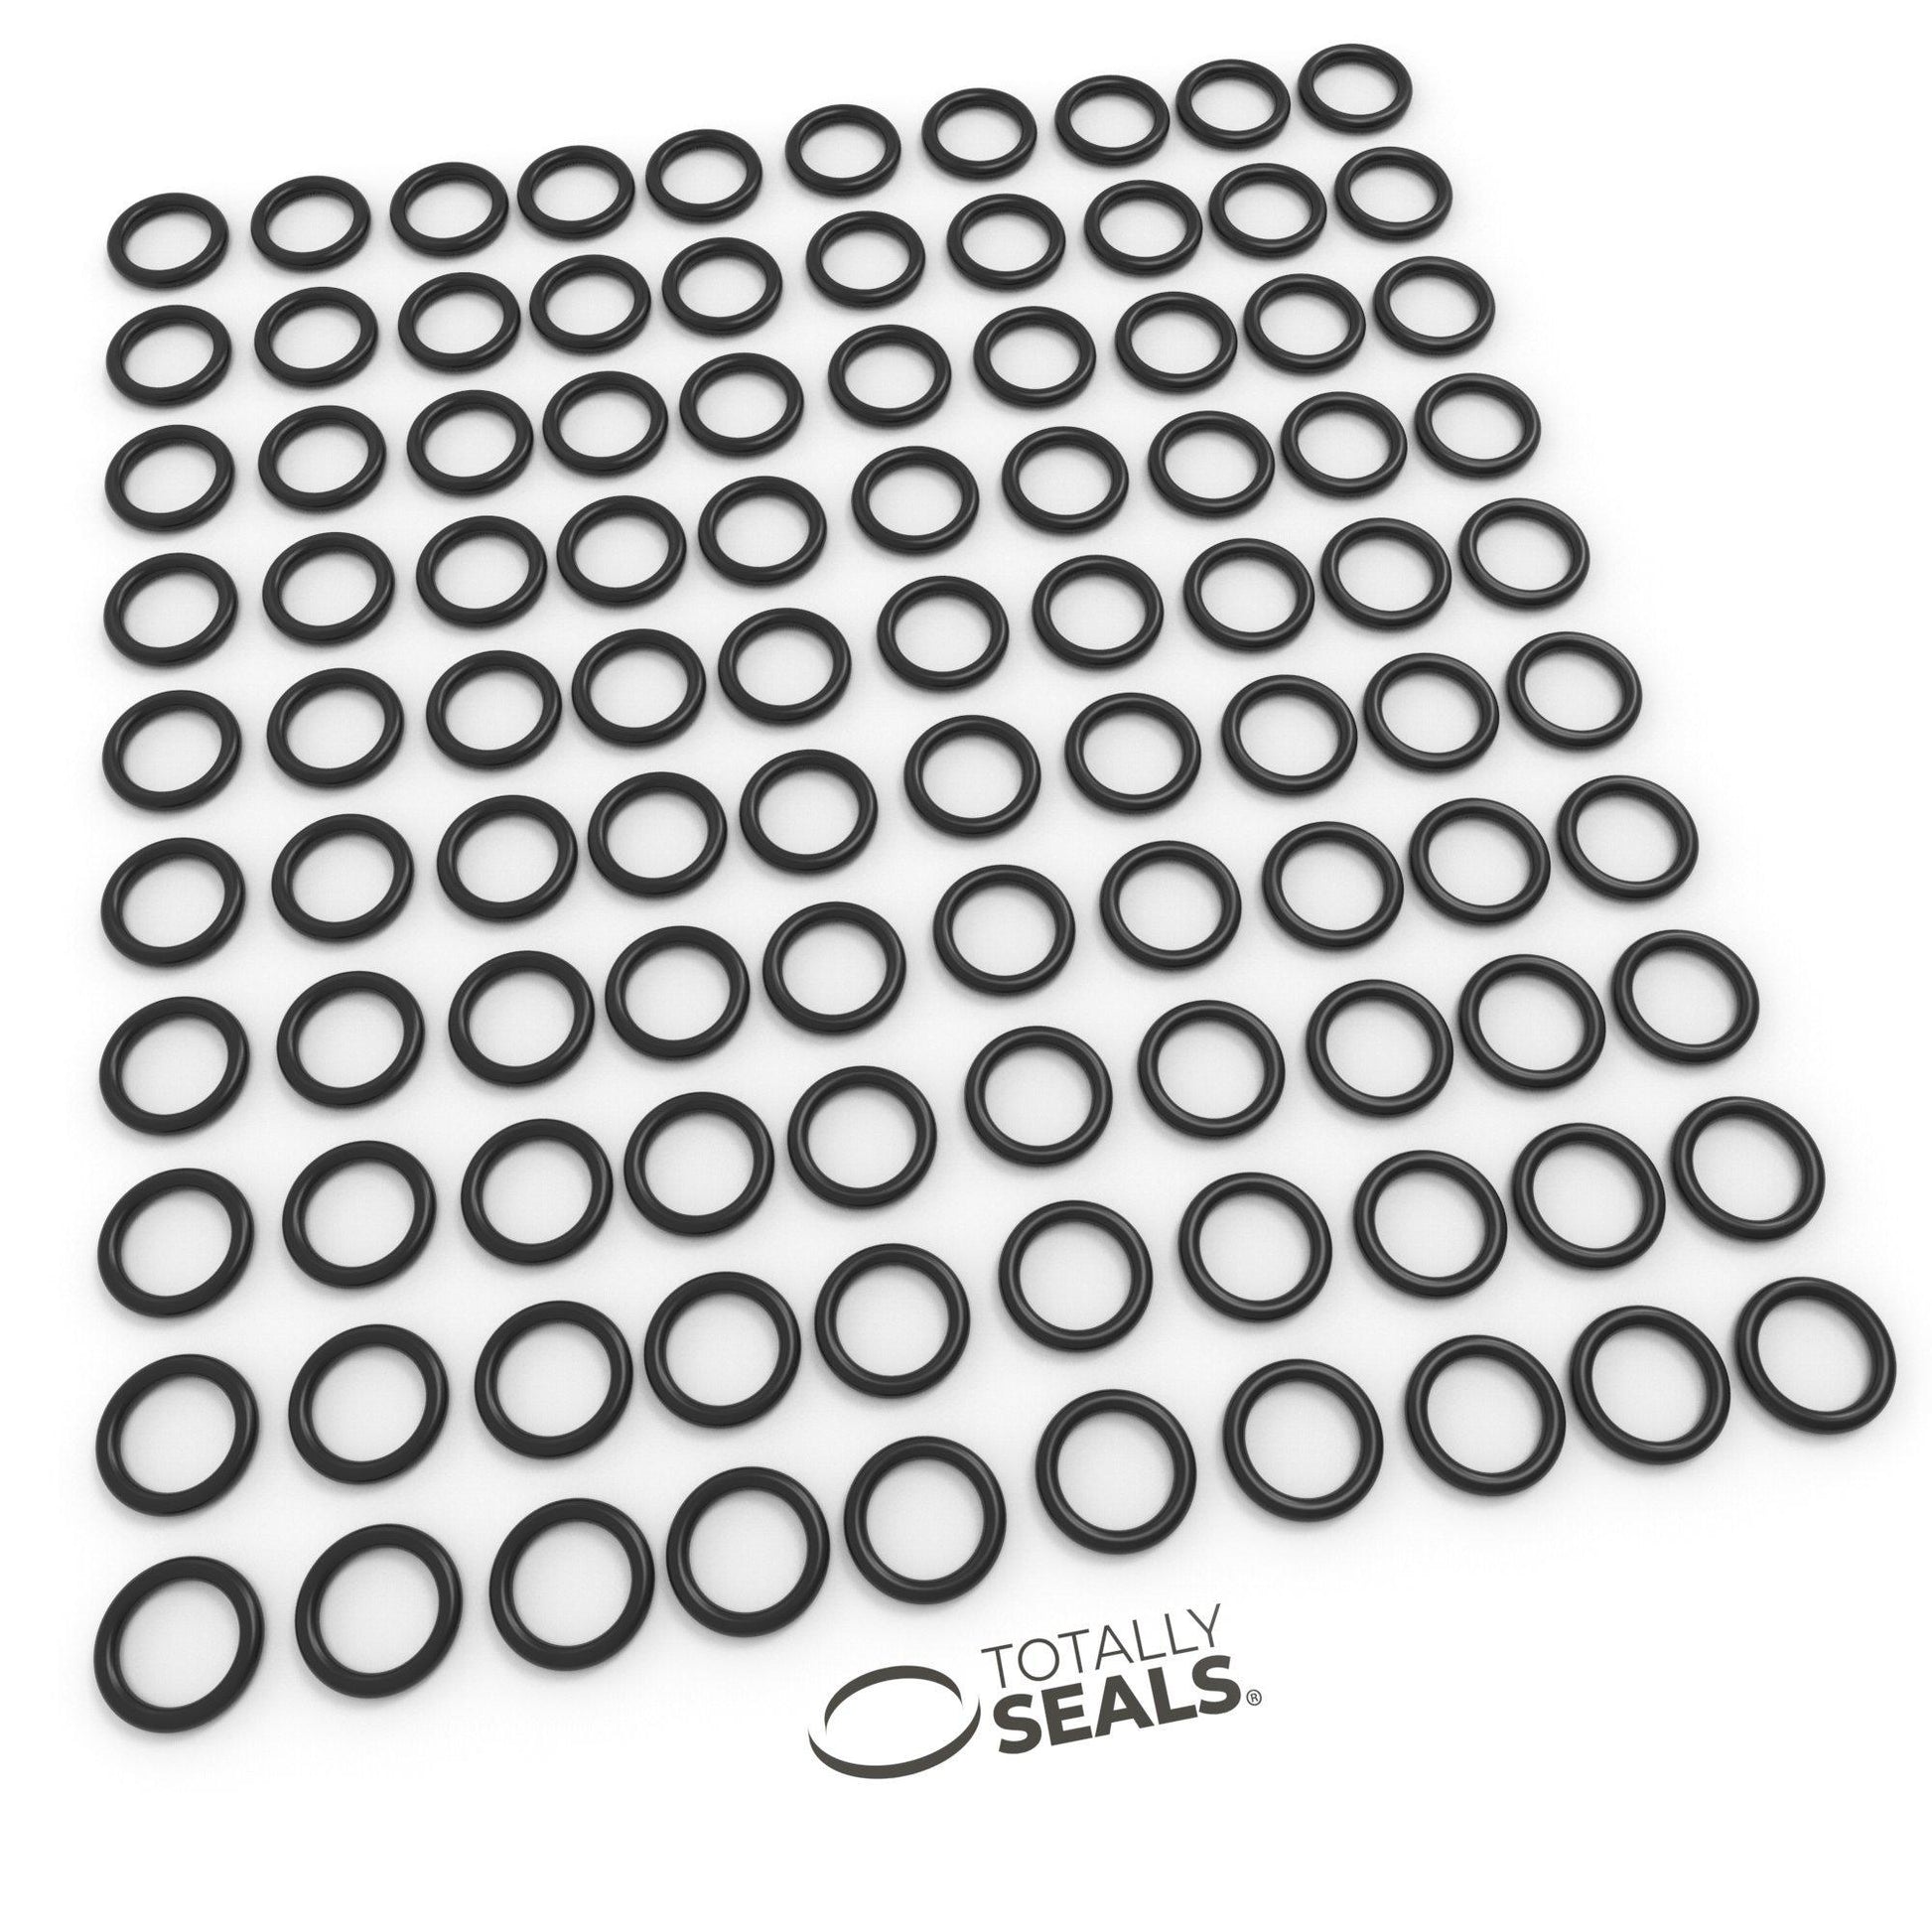 9mm x 2mm (13mm OD) Nitrile O-Rings - Totally Seals®